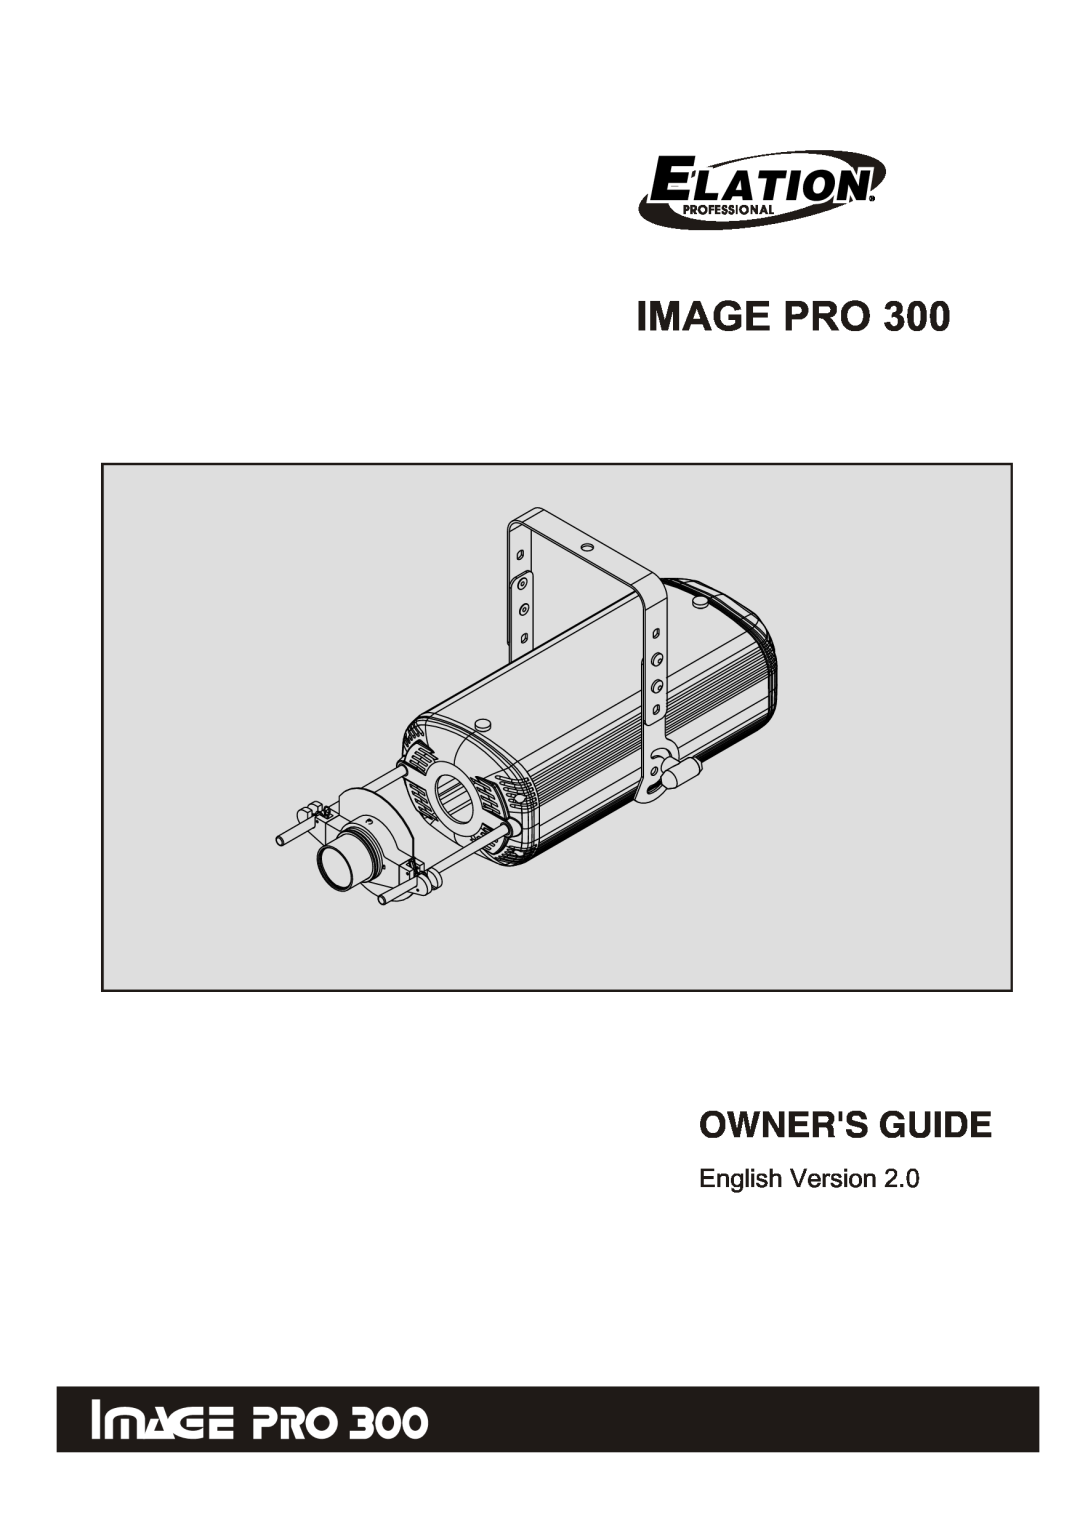 Elation Professional 300 manual Owners Guide, Image Pro 